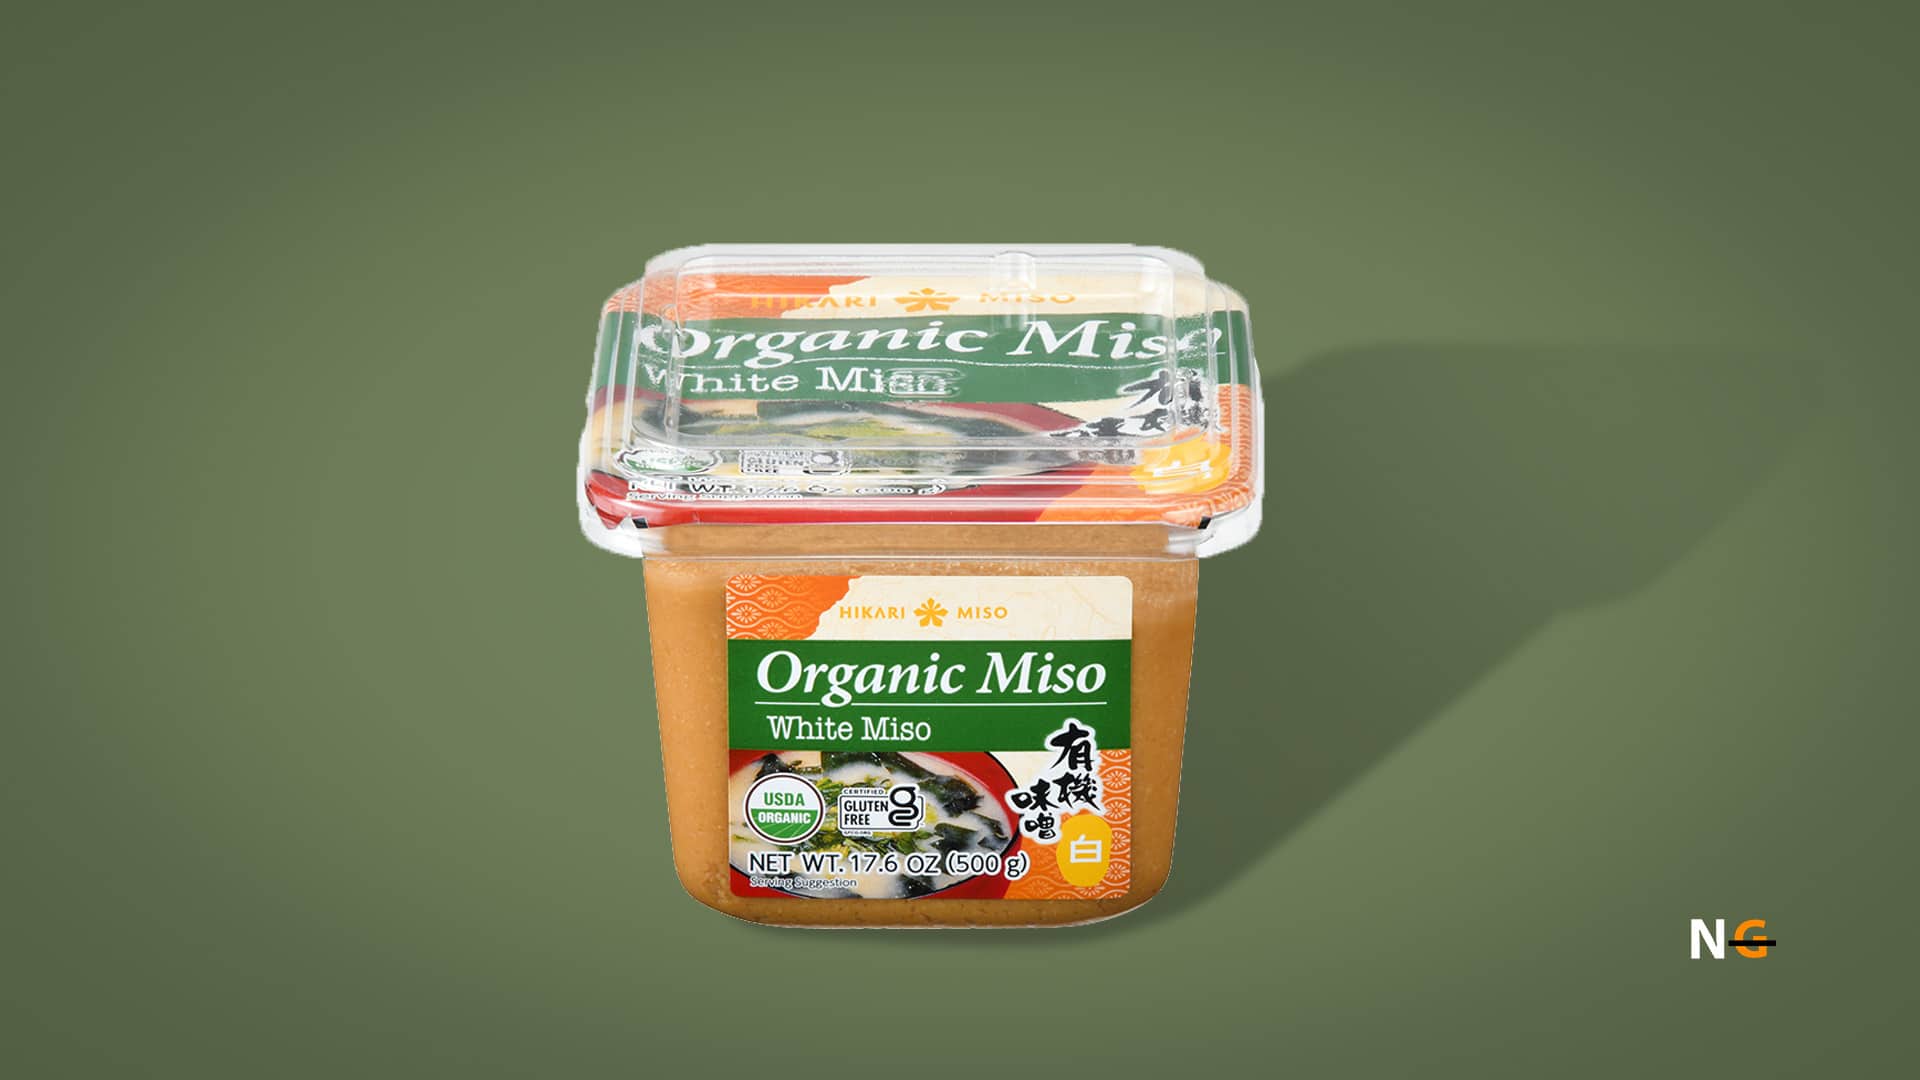 Gluten Free Miso Brands to Make Tastiest Soup at Home